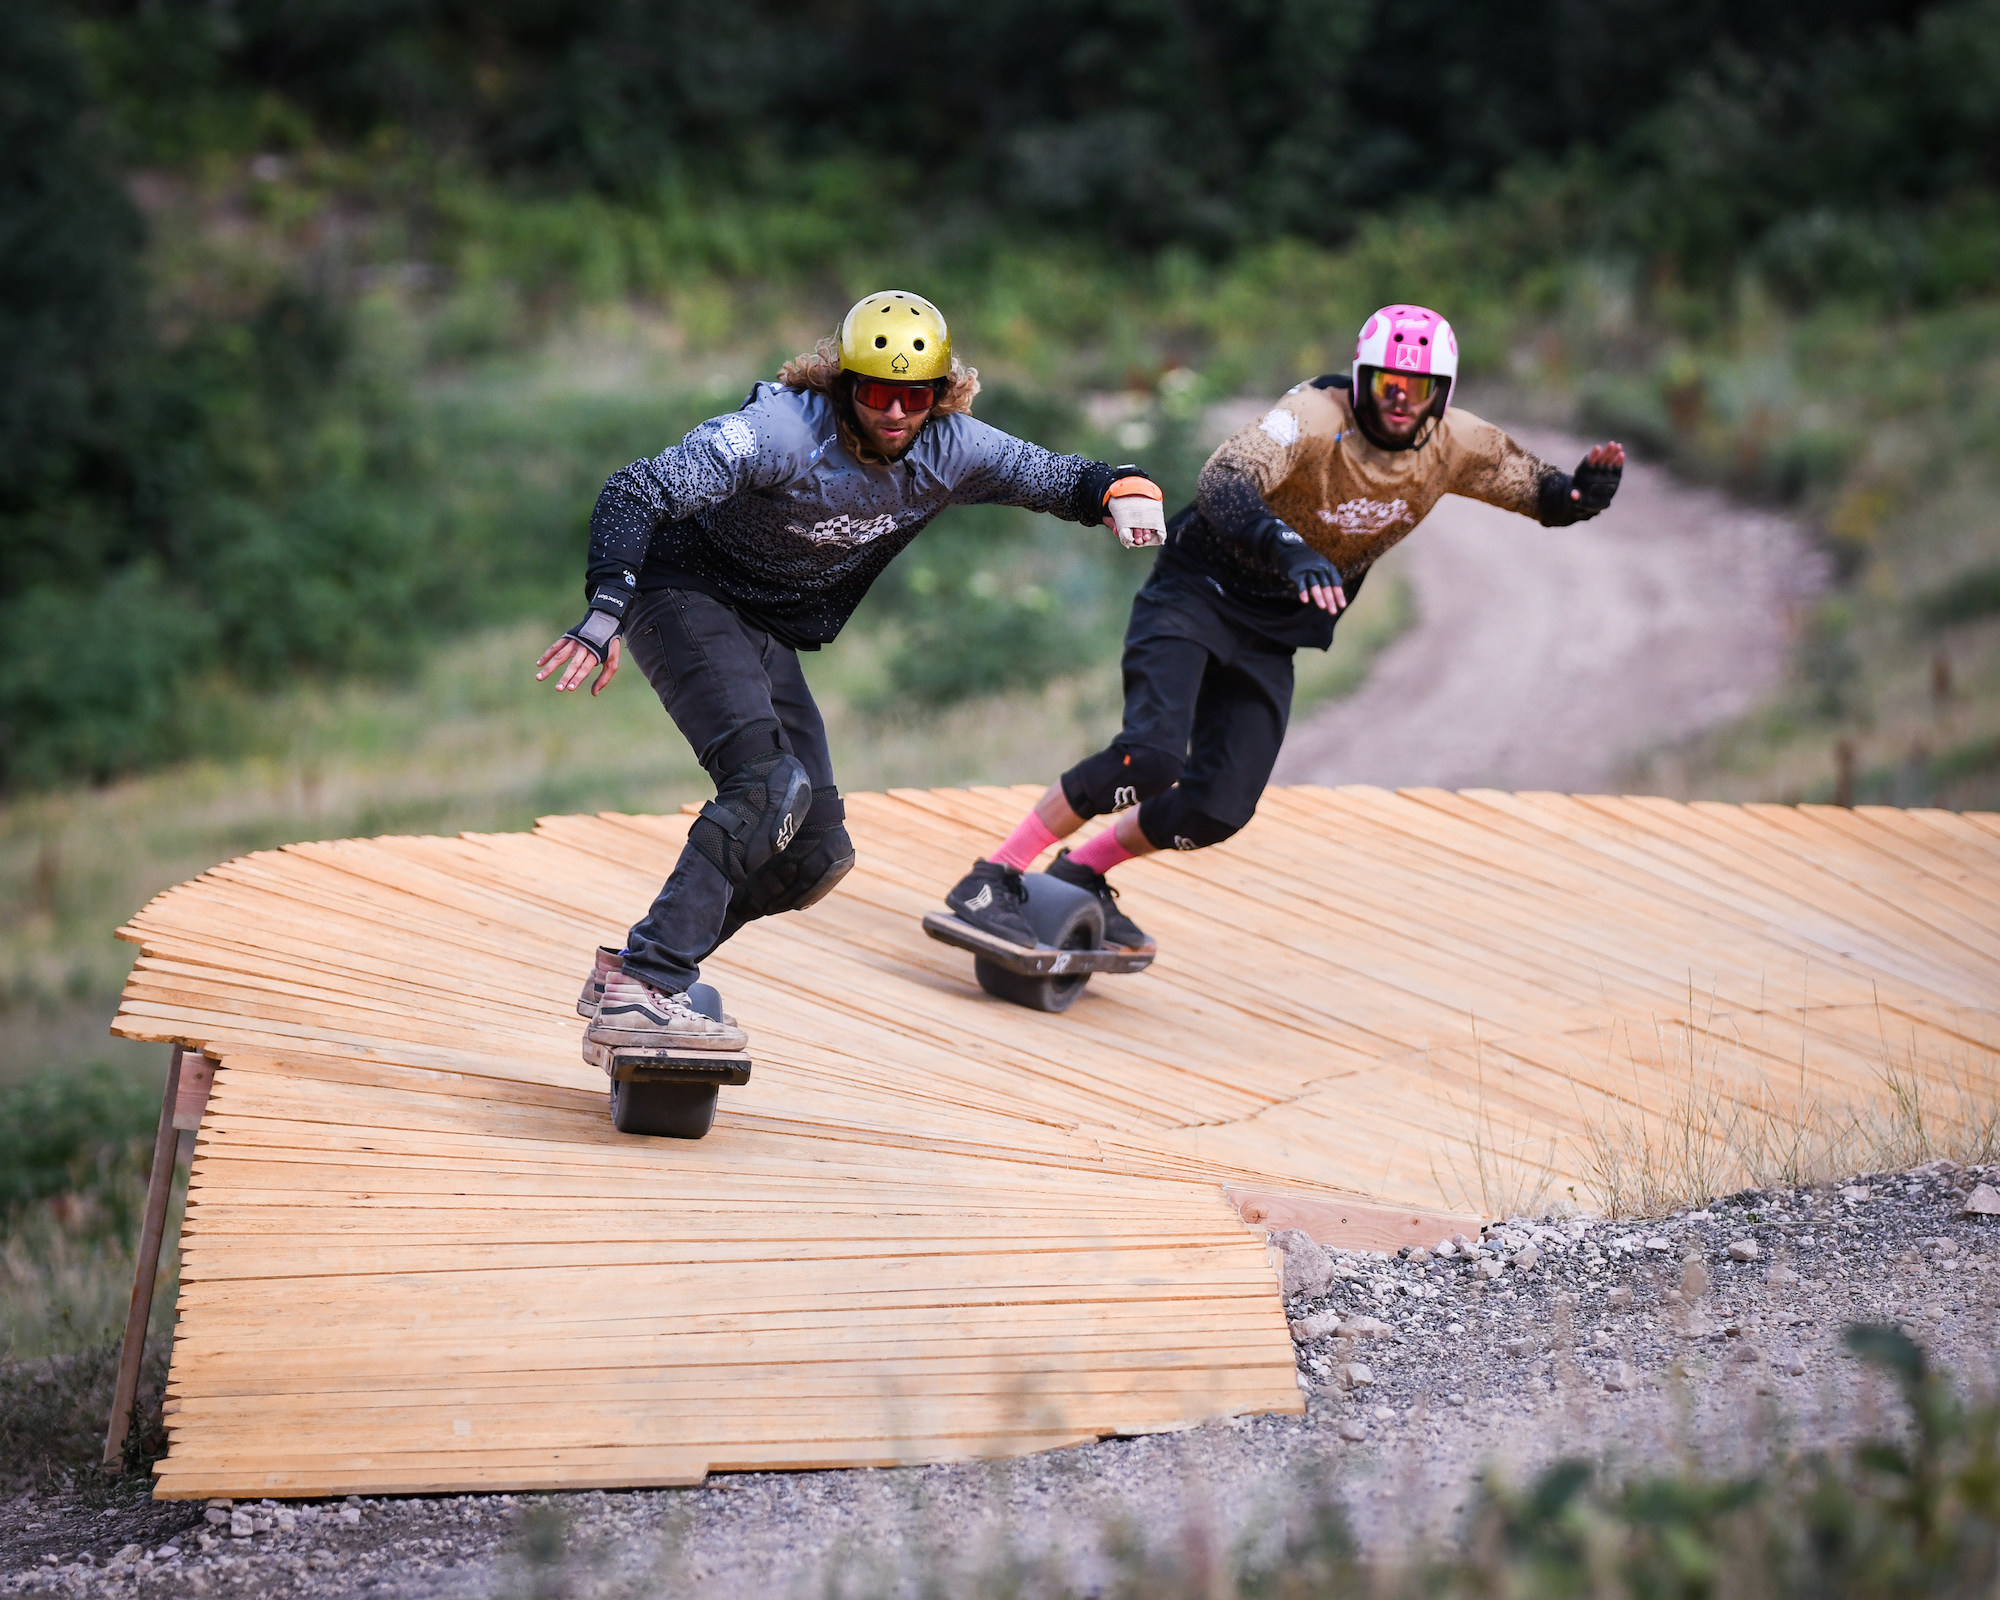 Onewheel's 2022 World Championship Race Promises to be Must Watch Event